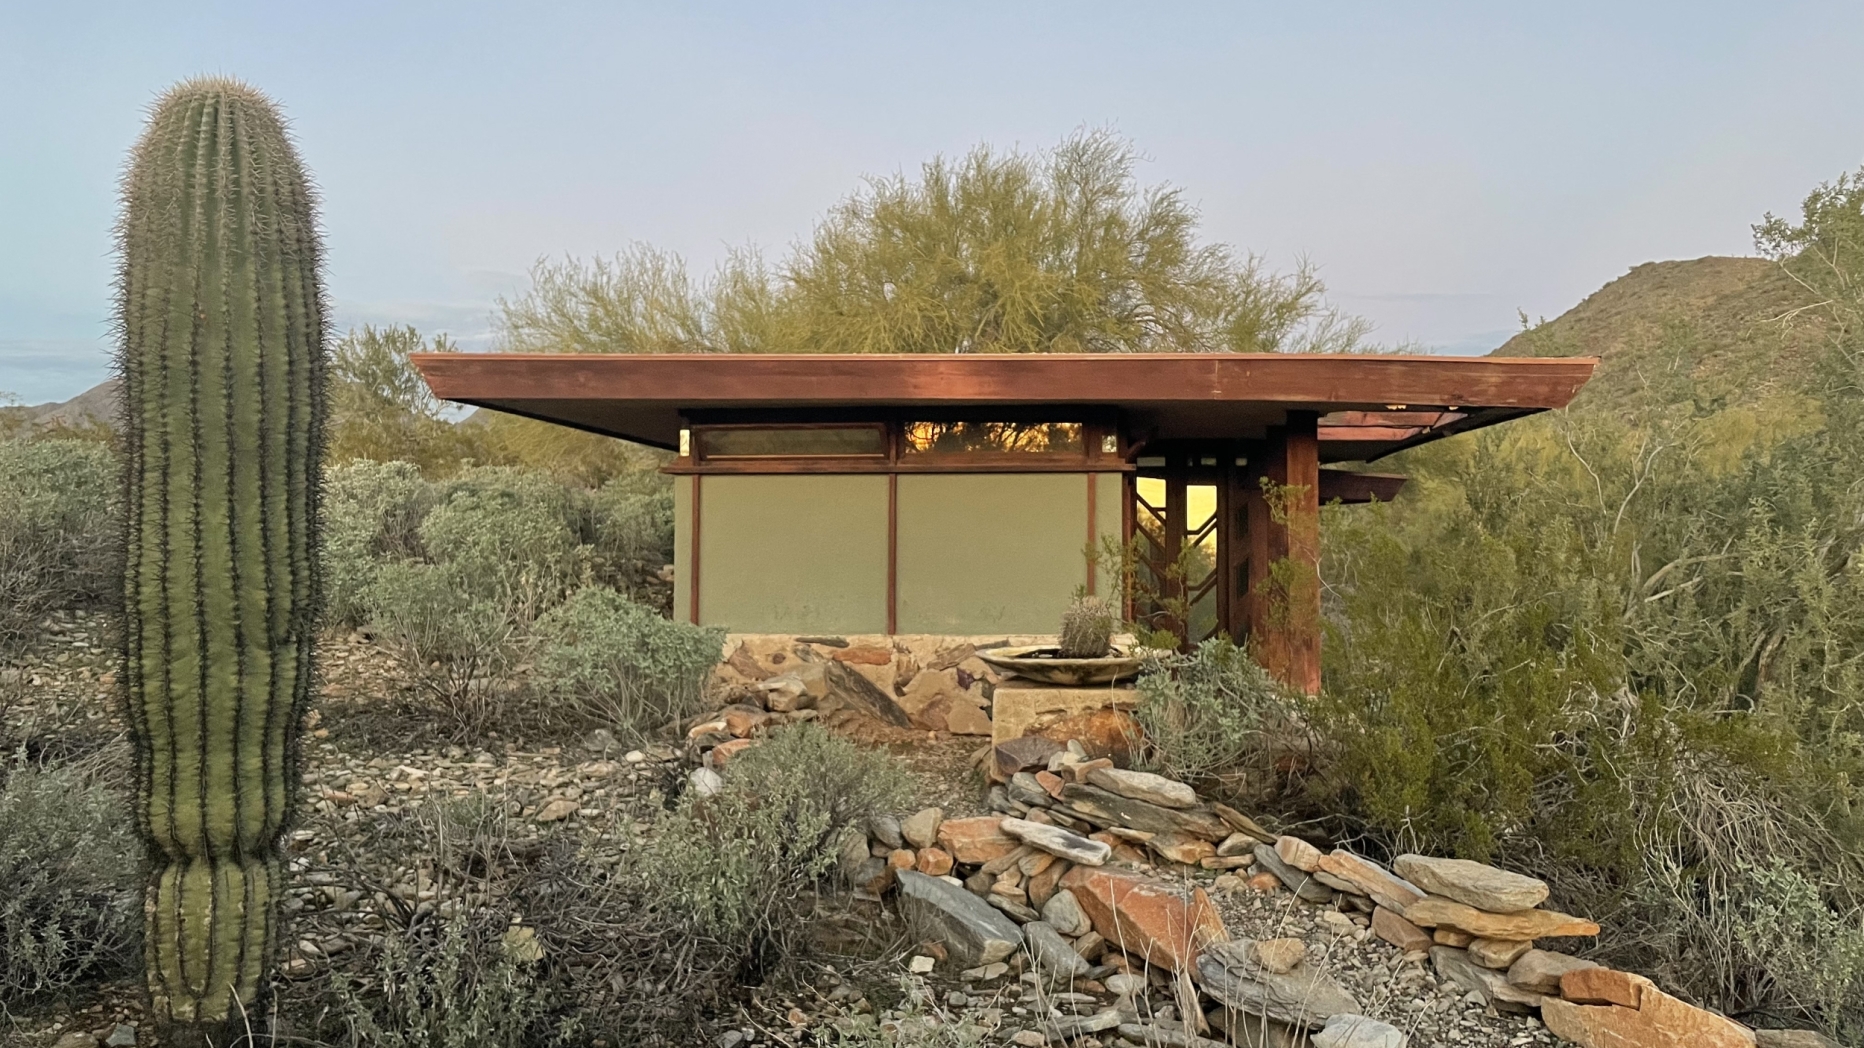 small modernist structure in desert with cactus in foreground